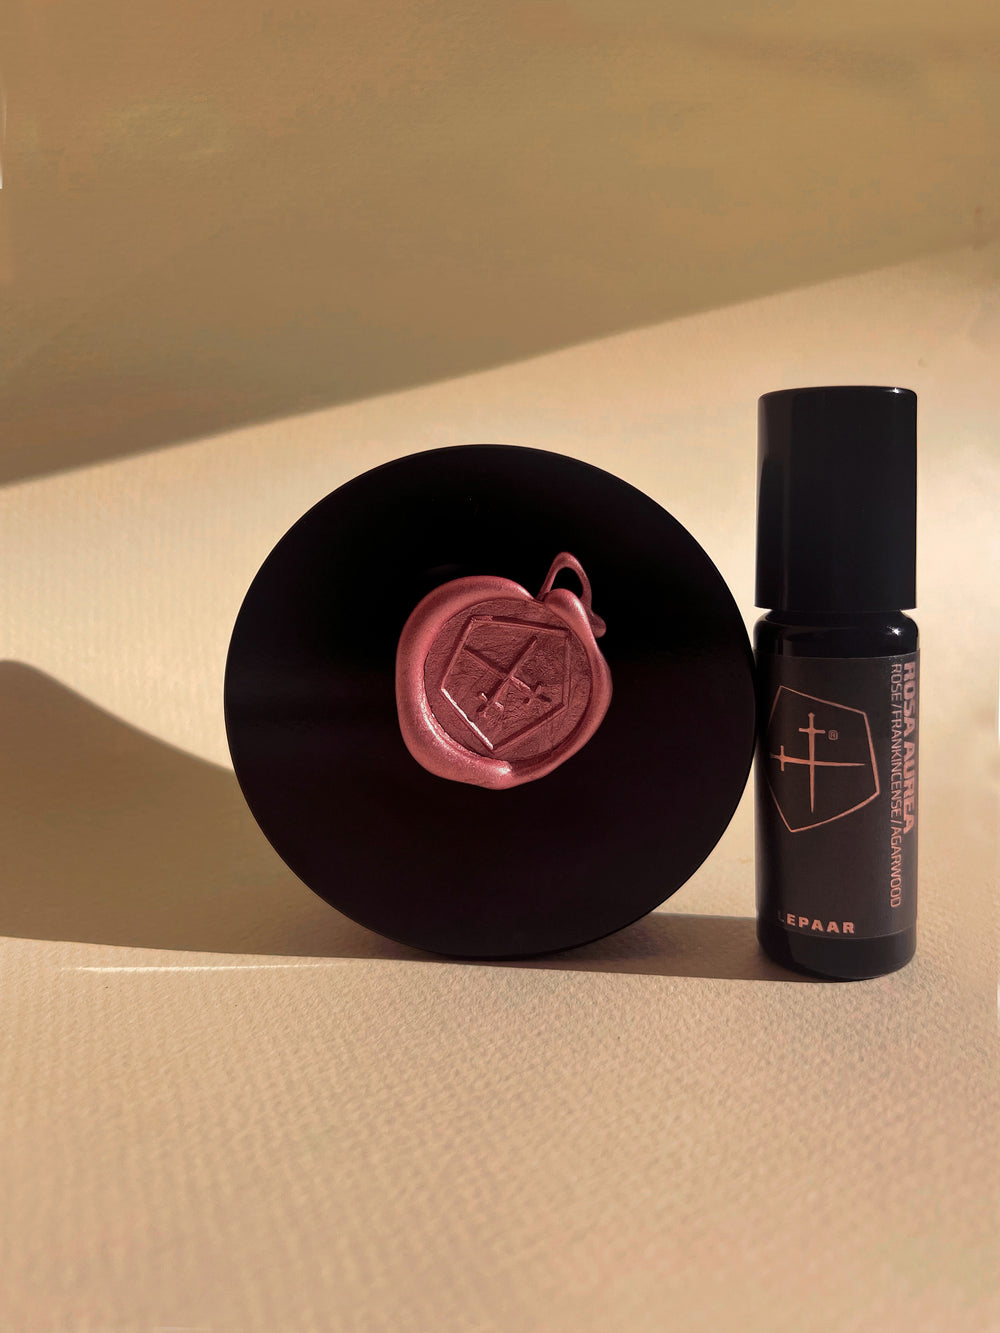 THE PERFUMED ROSE COLLECTION / Damasque Rose Perfumed Body Balm, Rosa Aurea Perfume Oil + complimentary Damasque Rose Mineral Bath Salt